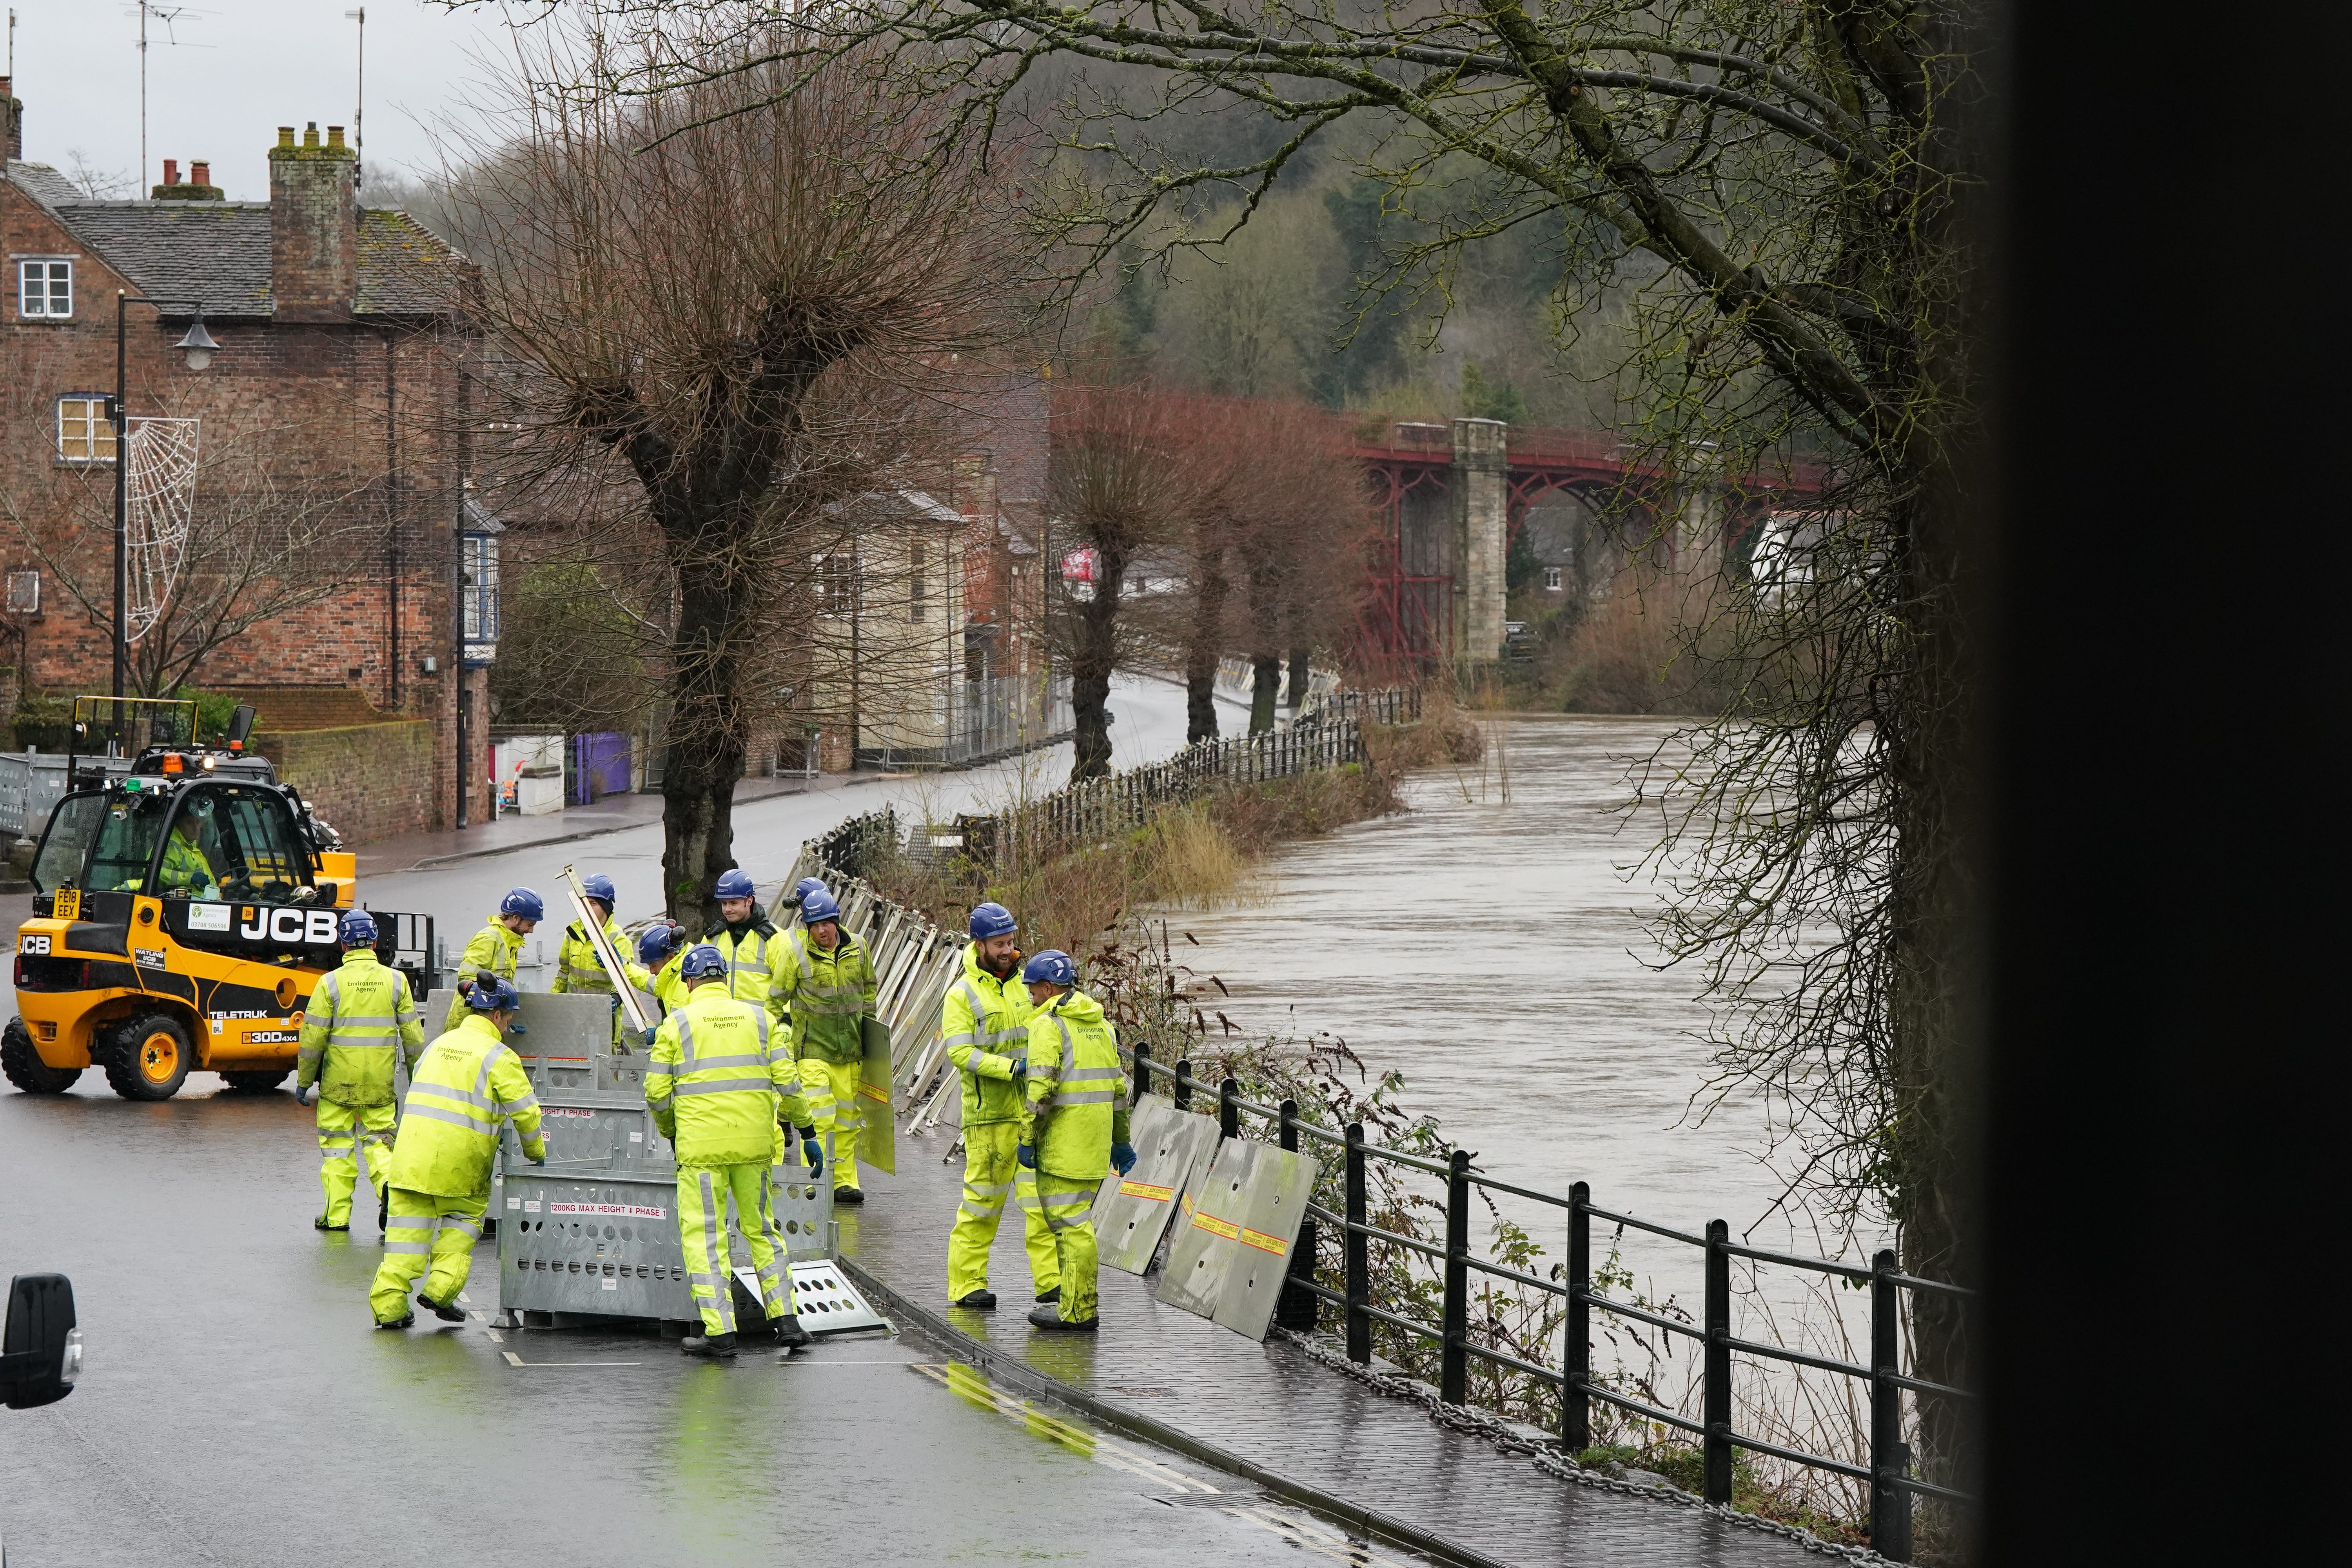 The River Severn has risen, causing flood defences to be put in place along the wharf at Ironbridge